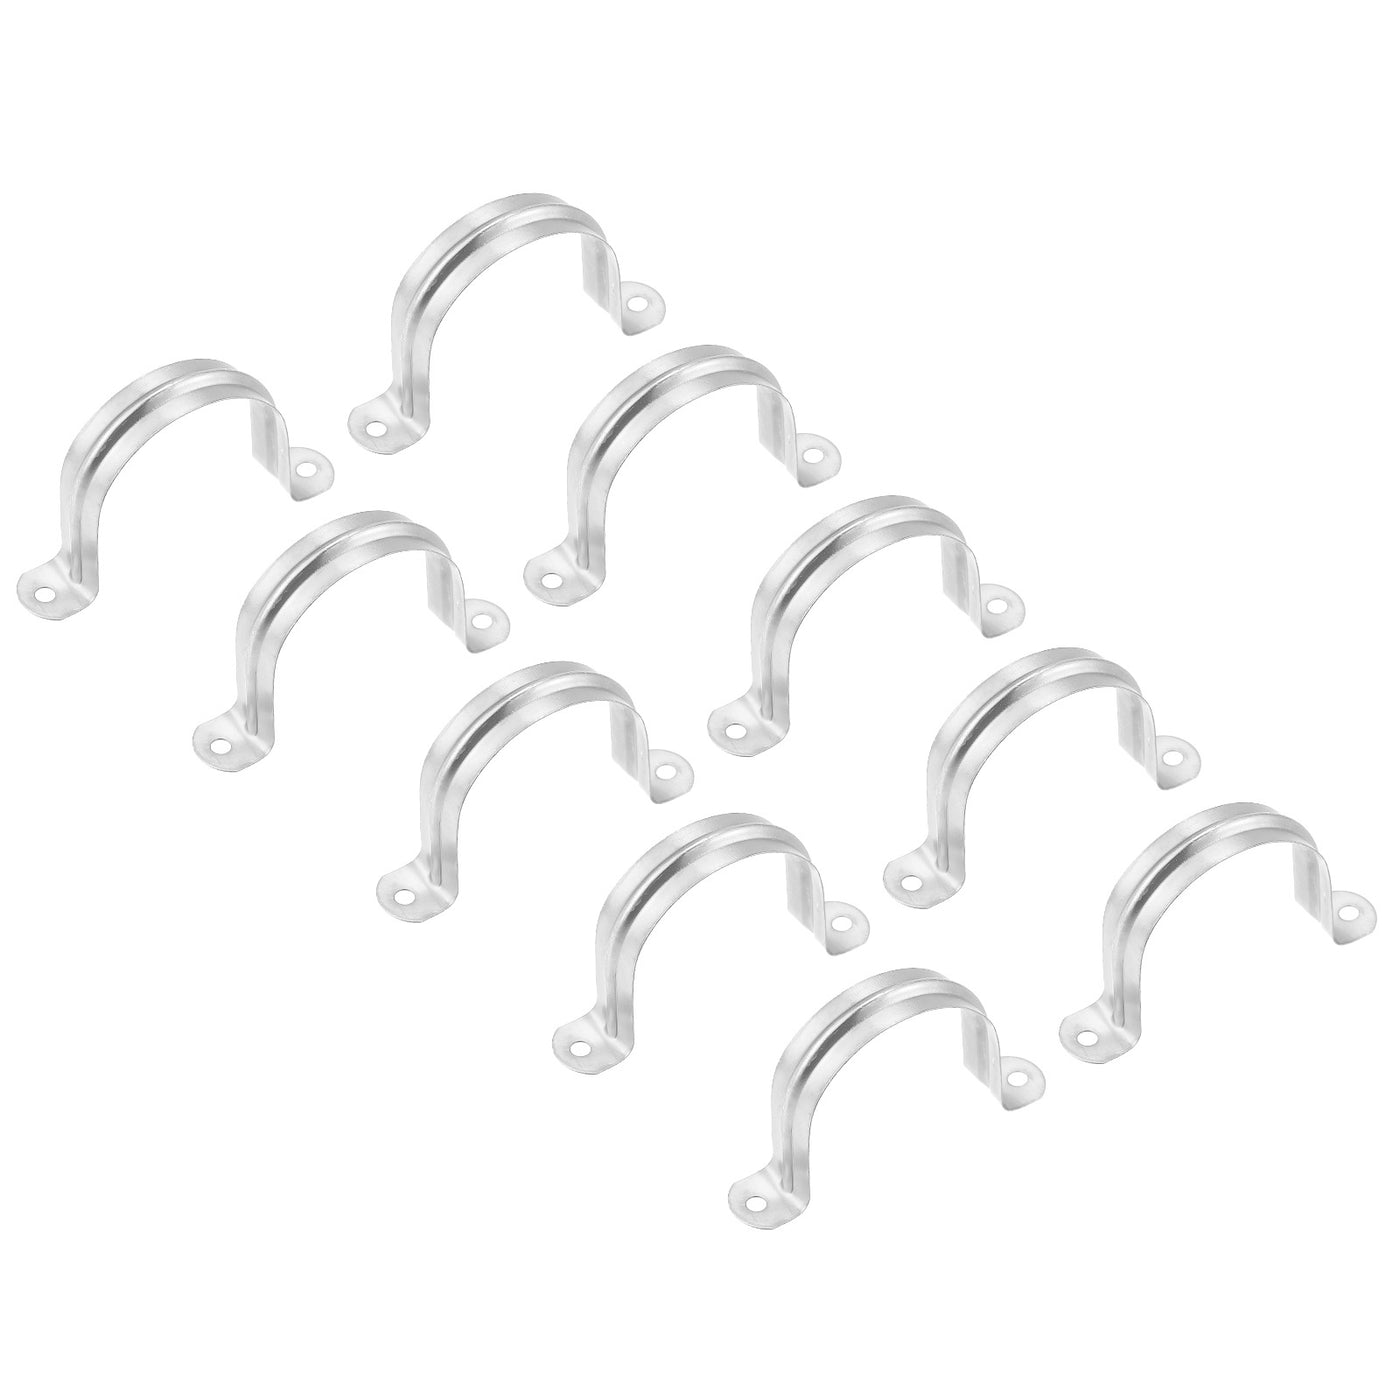 uxcell Uxcell Rigid Pipe Strap 24pcs 4 5/16" (110mm) Carbon Steel U Bracket Tension Tube Clamp